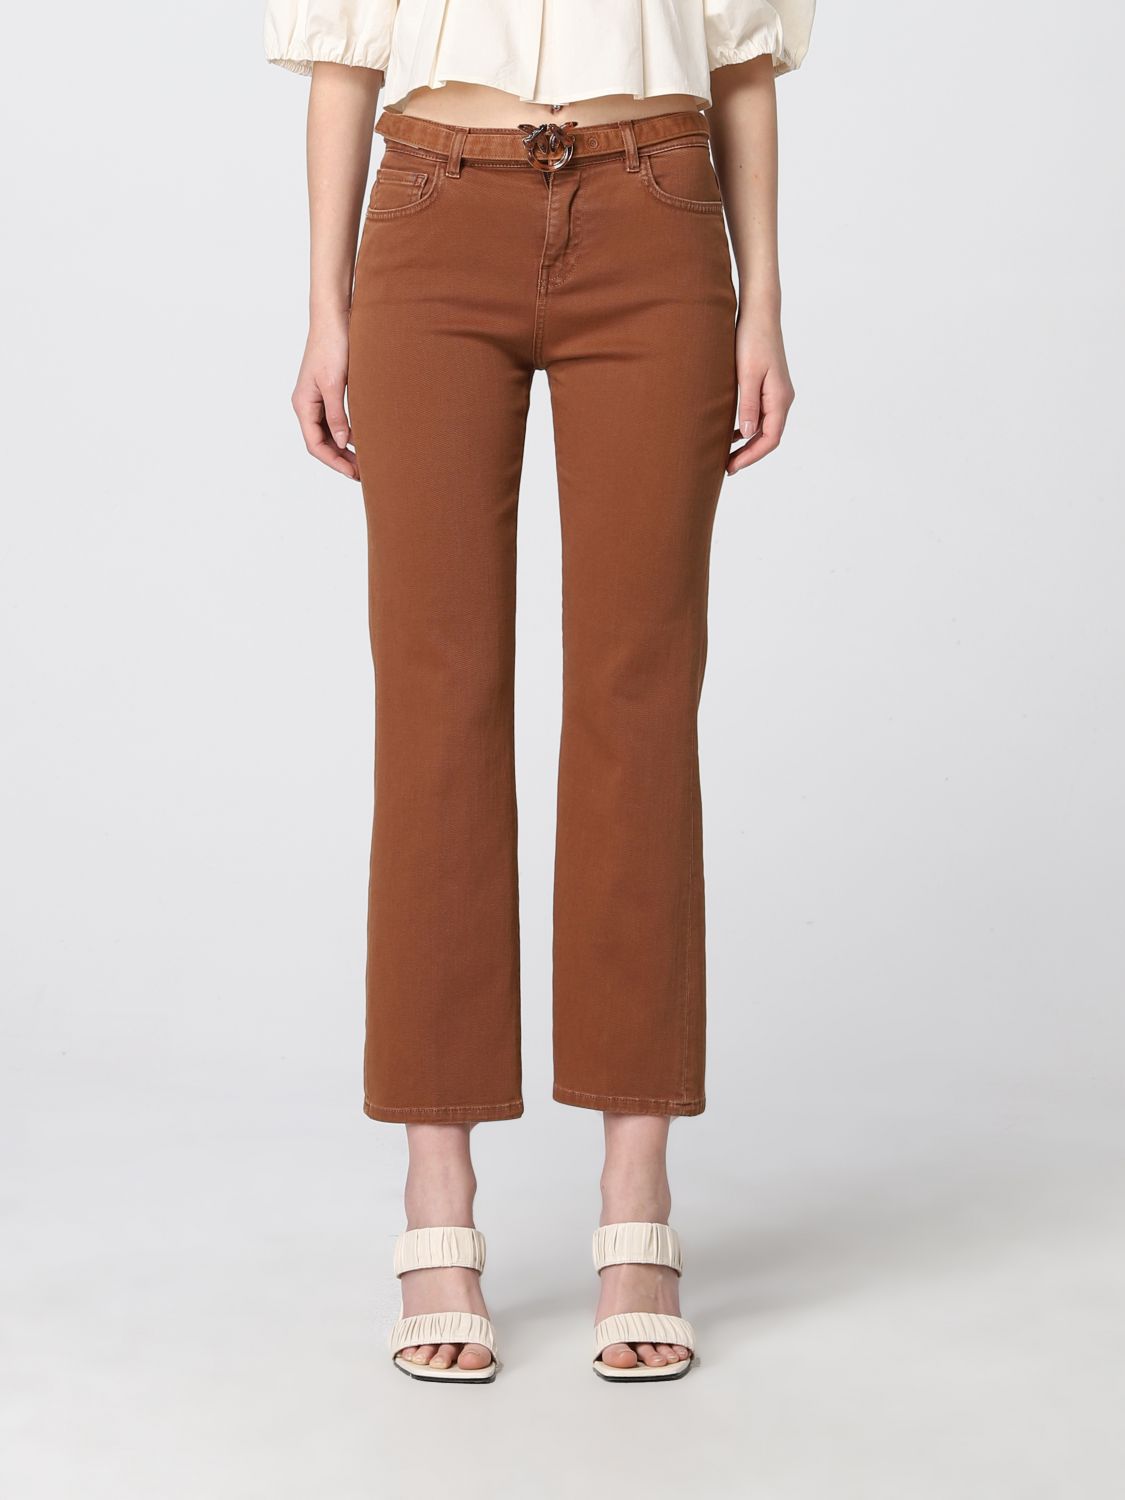 Pinko Cropped Jeans In Cotton Denim In Brown